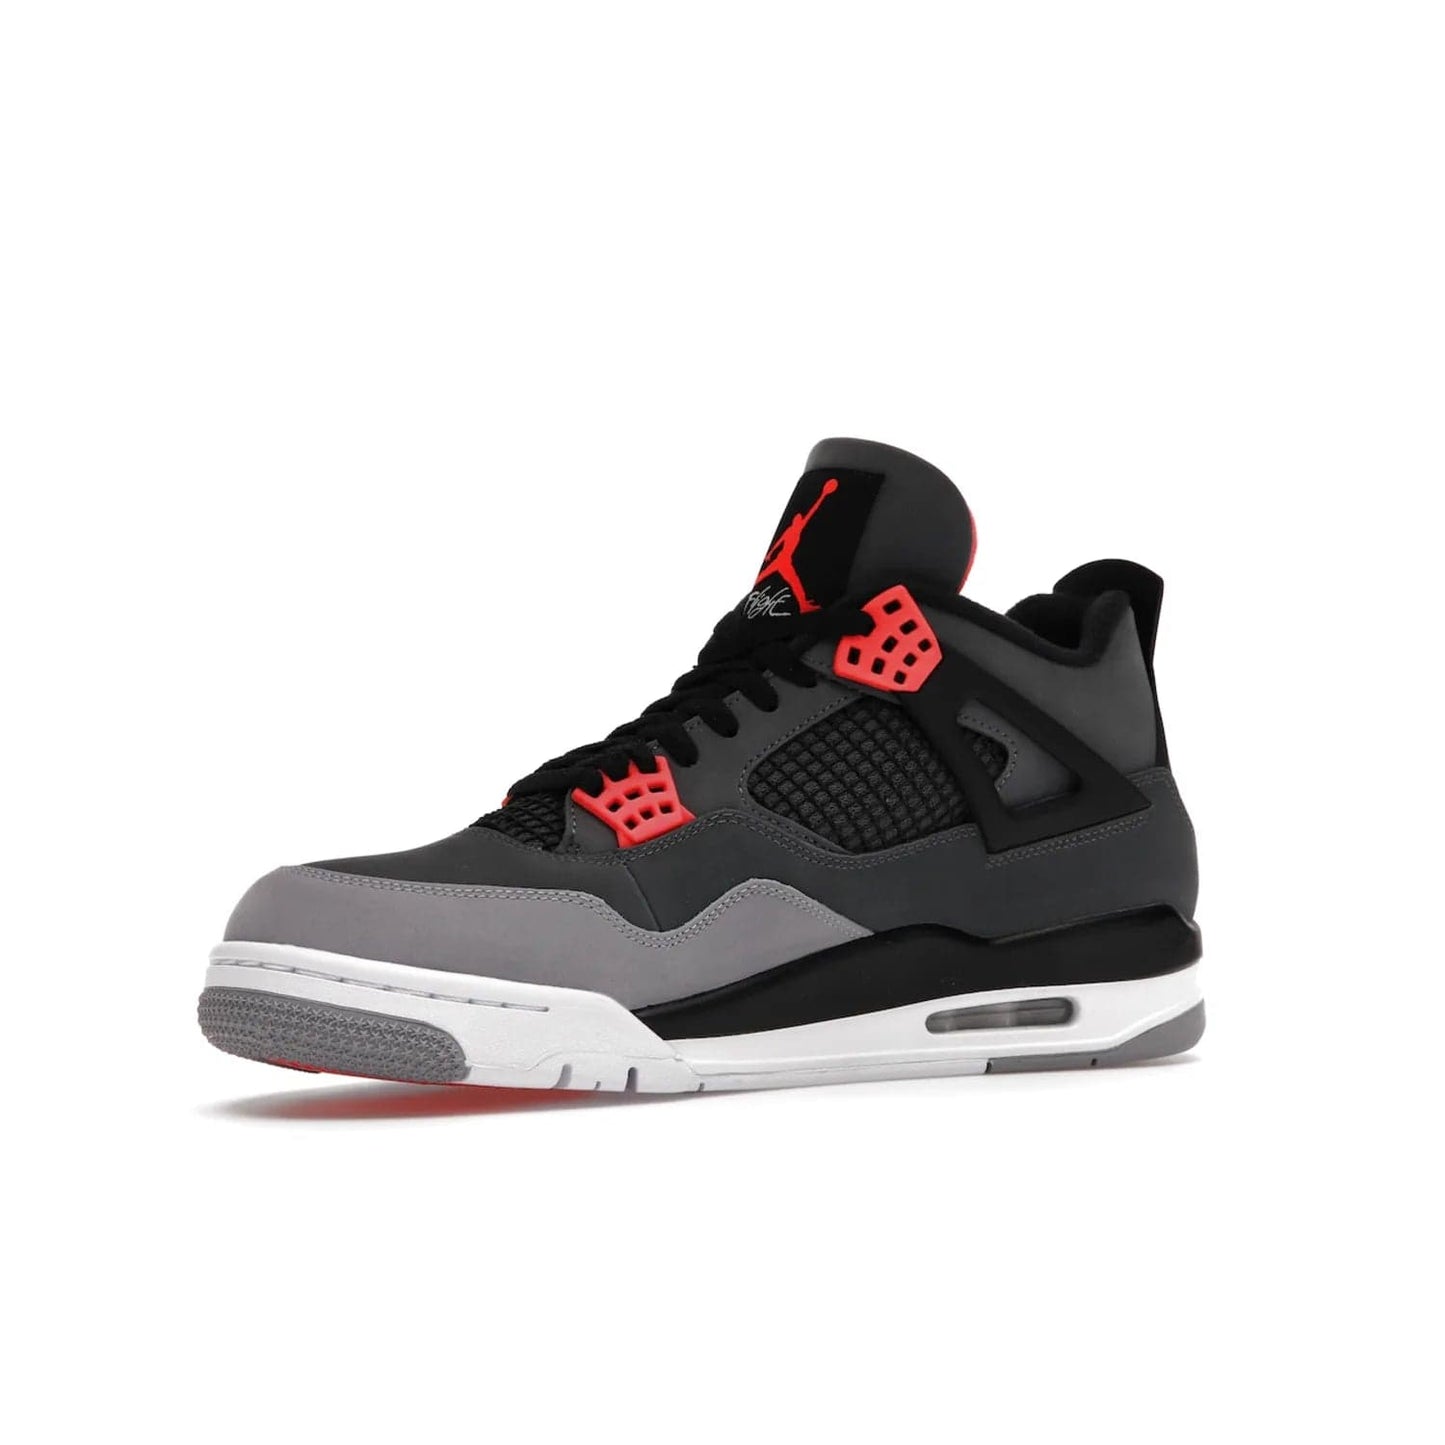 Jordan 4 Retro Infrared - Image 16 - Only at www.BallersClubKickz.com - Introducing the classic & timeless Air Jordan 4 Infrared. Durabuck upper, TPU mesh inserts, tech straps & heel tabs in dark grey and infrared accents. White sole with visible Air units. Out June 15, 2022. Get your pair now!